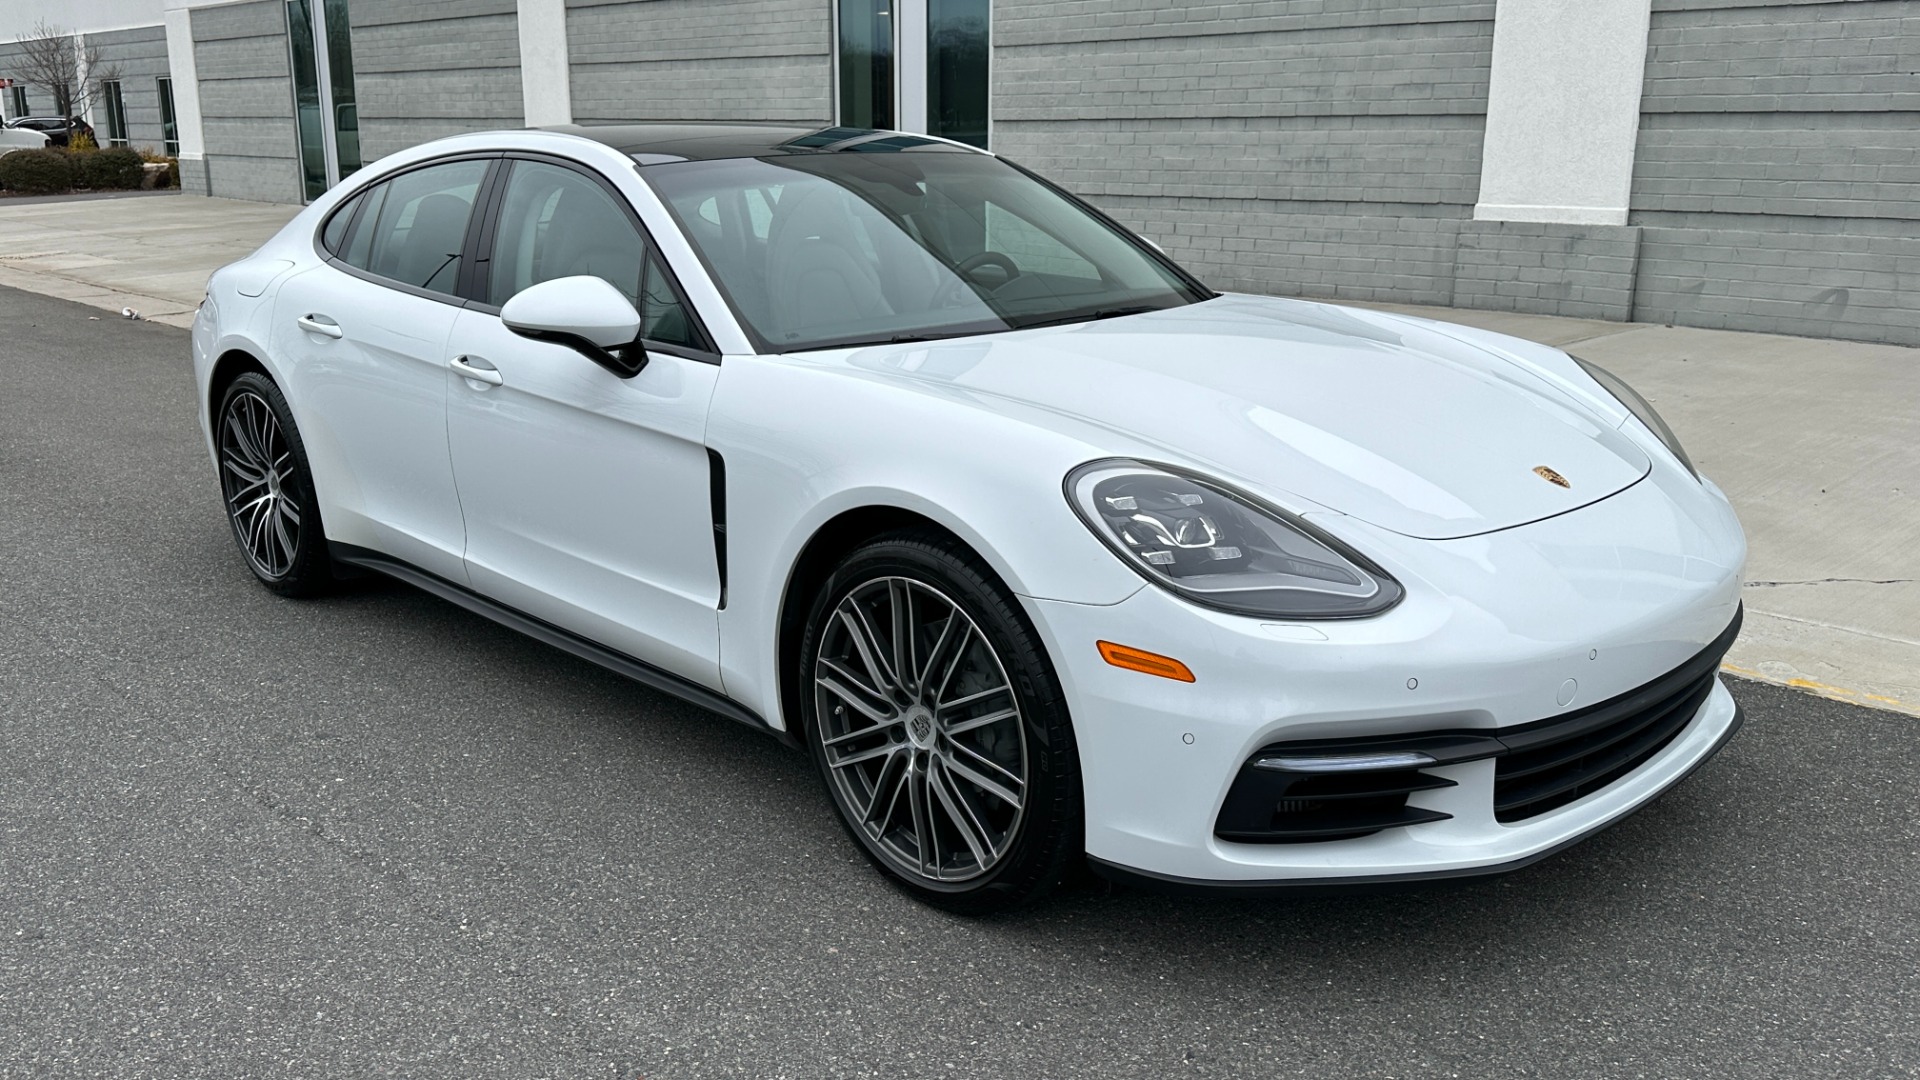 Used 2017 Porsche Panamera 4S / PREMIUM PLUS / AIR SUSPENSION / SPORT CHRONO / 21IN WHEELS for sale $74,000 at Formula Imports in Charlotte NC 28227 5